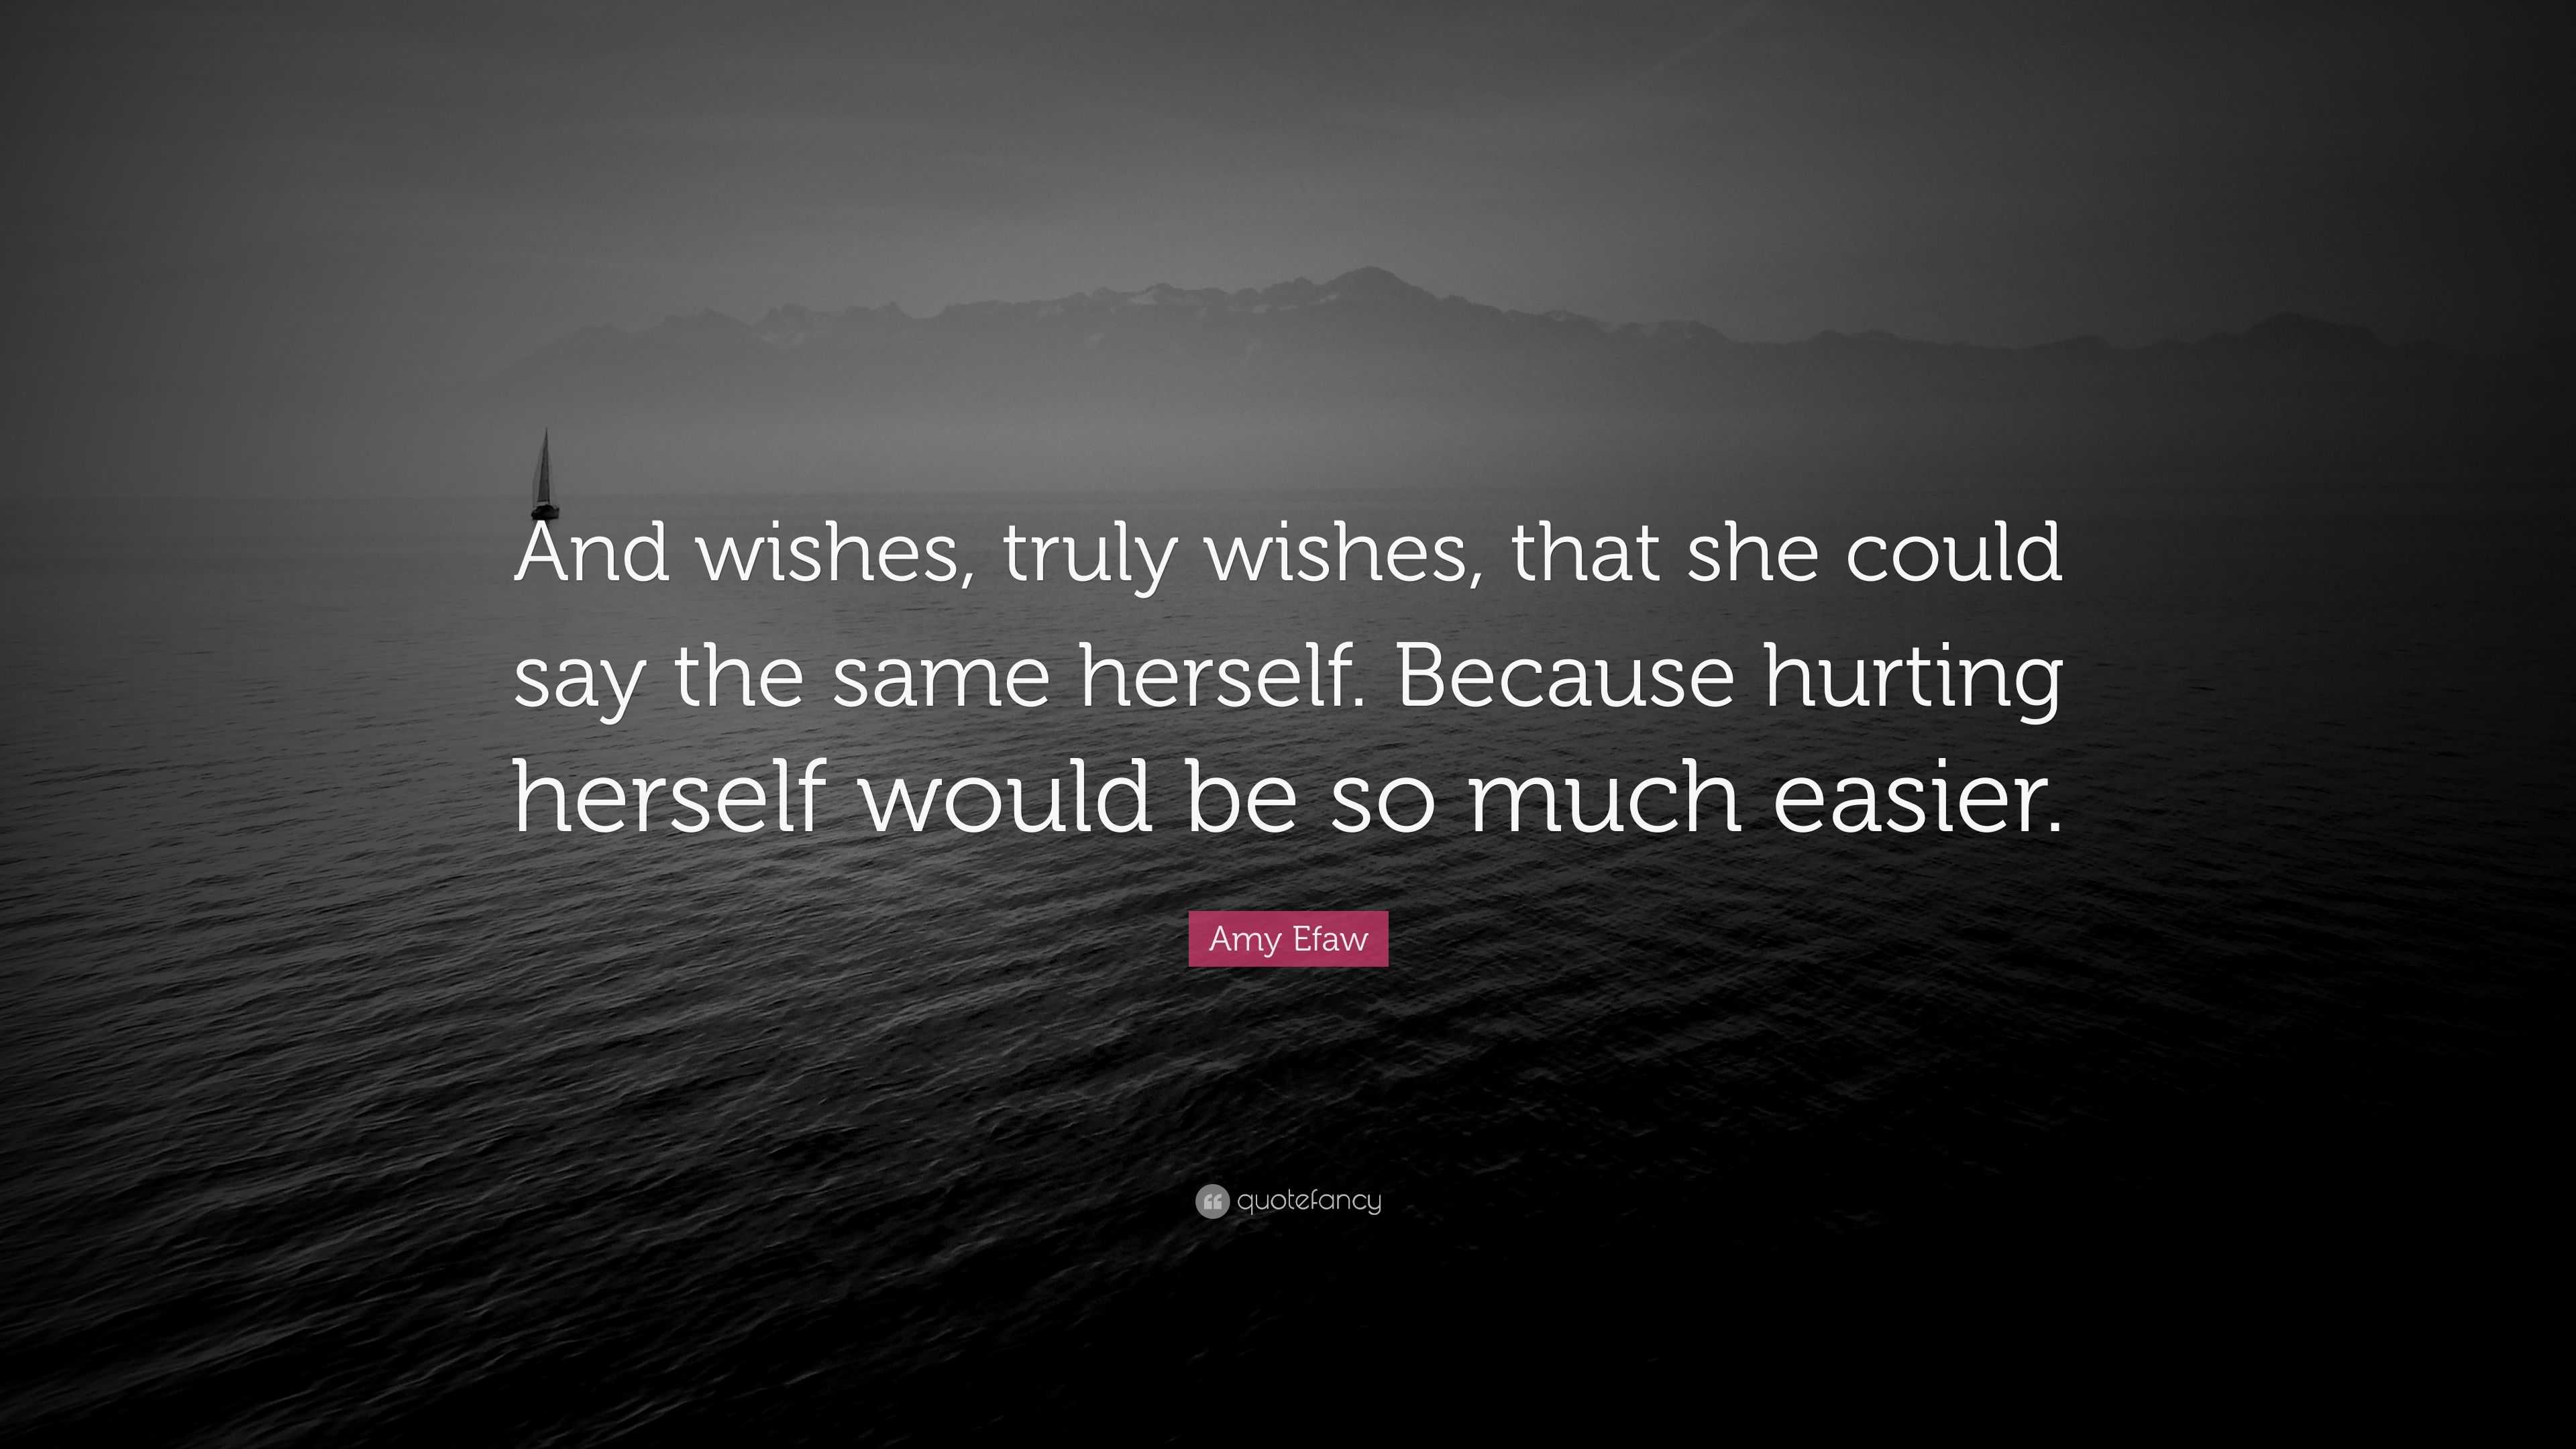 Amy Efaw Quote: “And wishes, truly wishes, that she could say the same ...